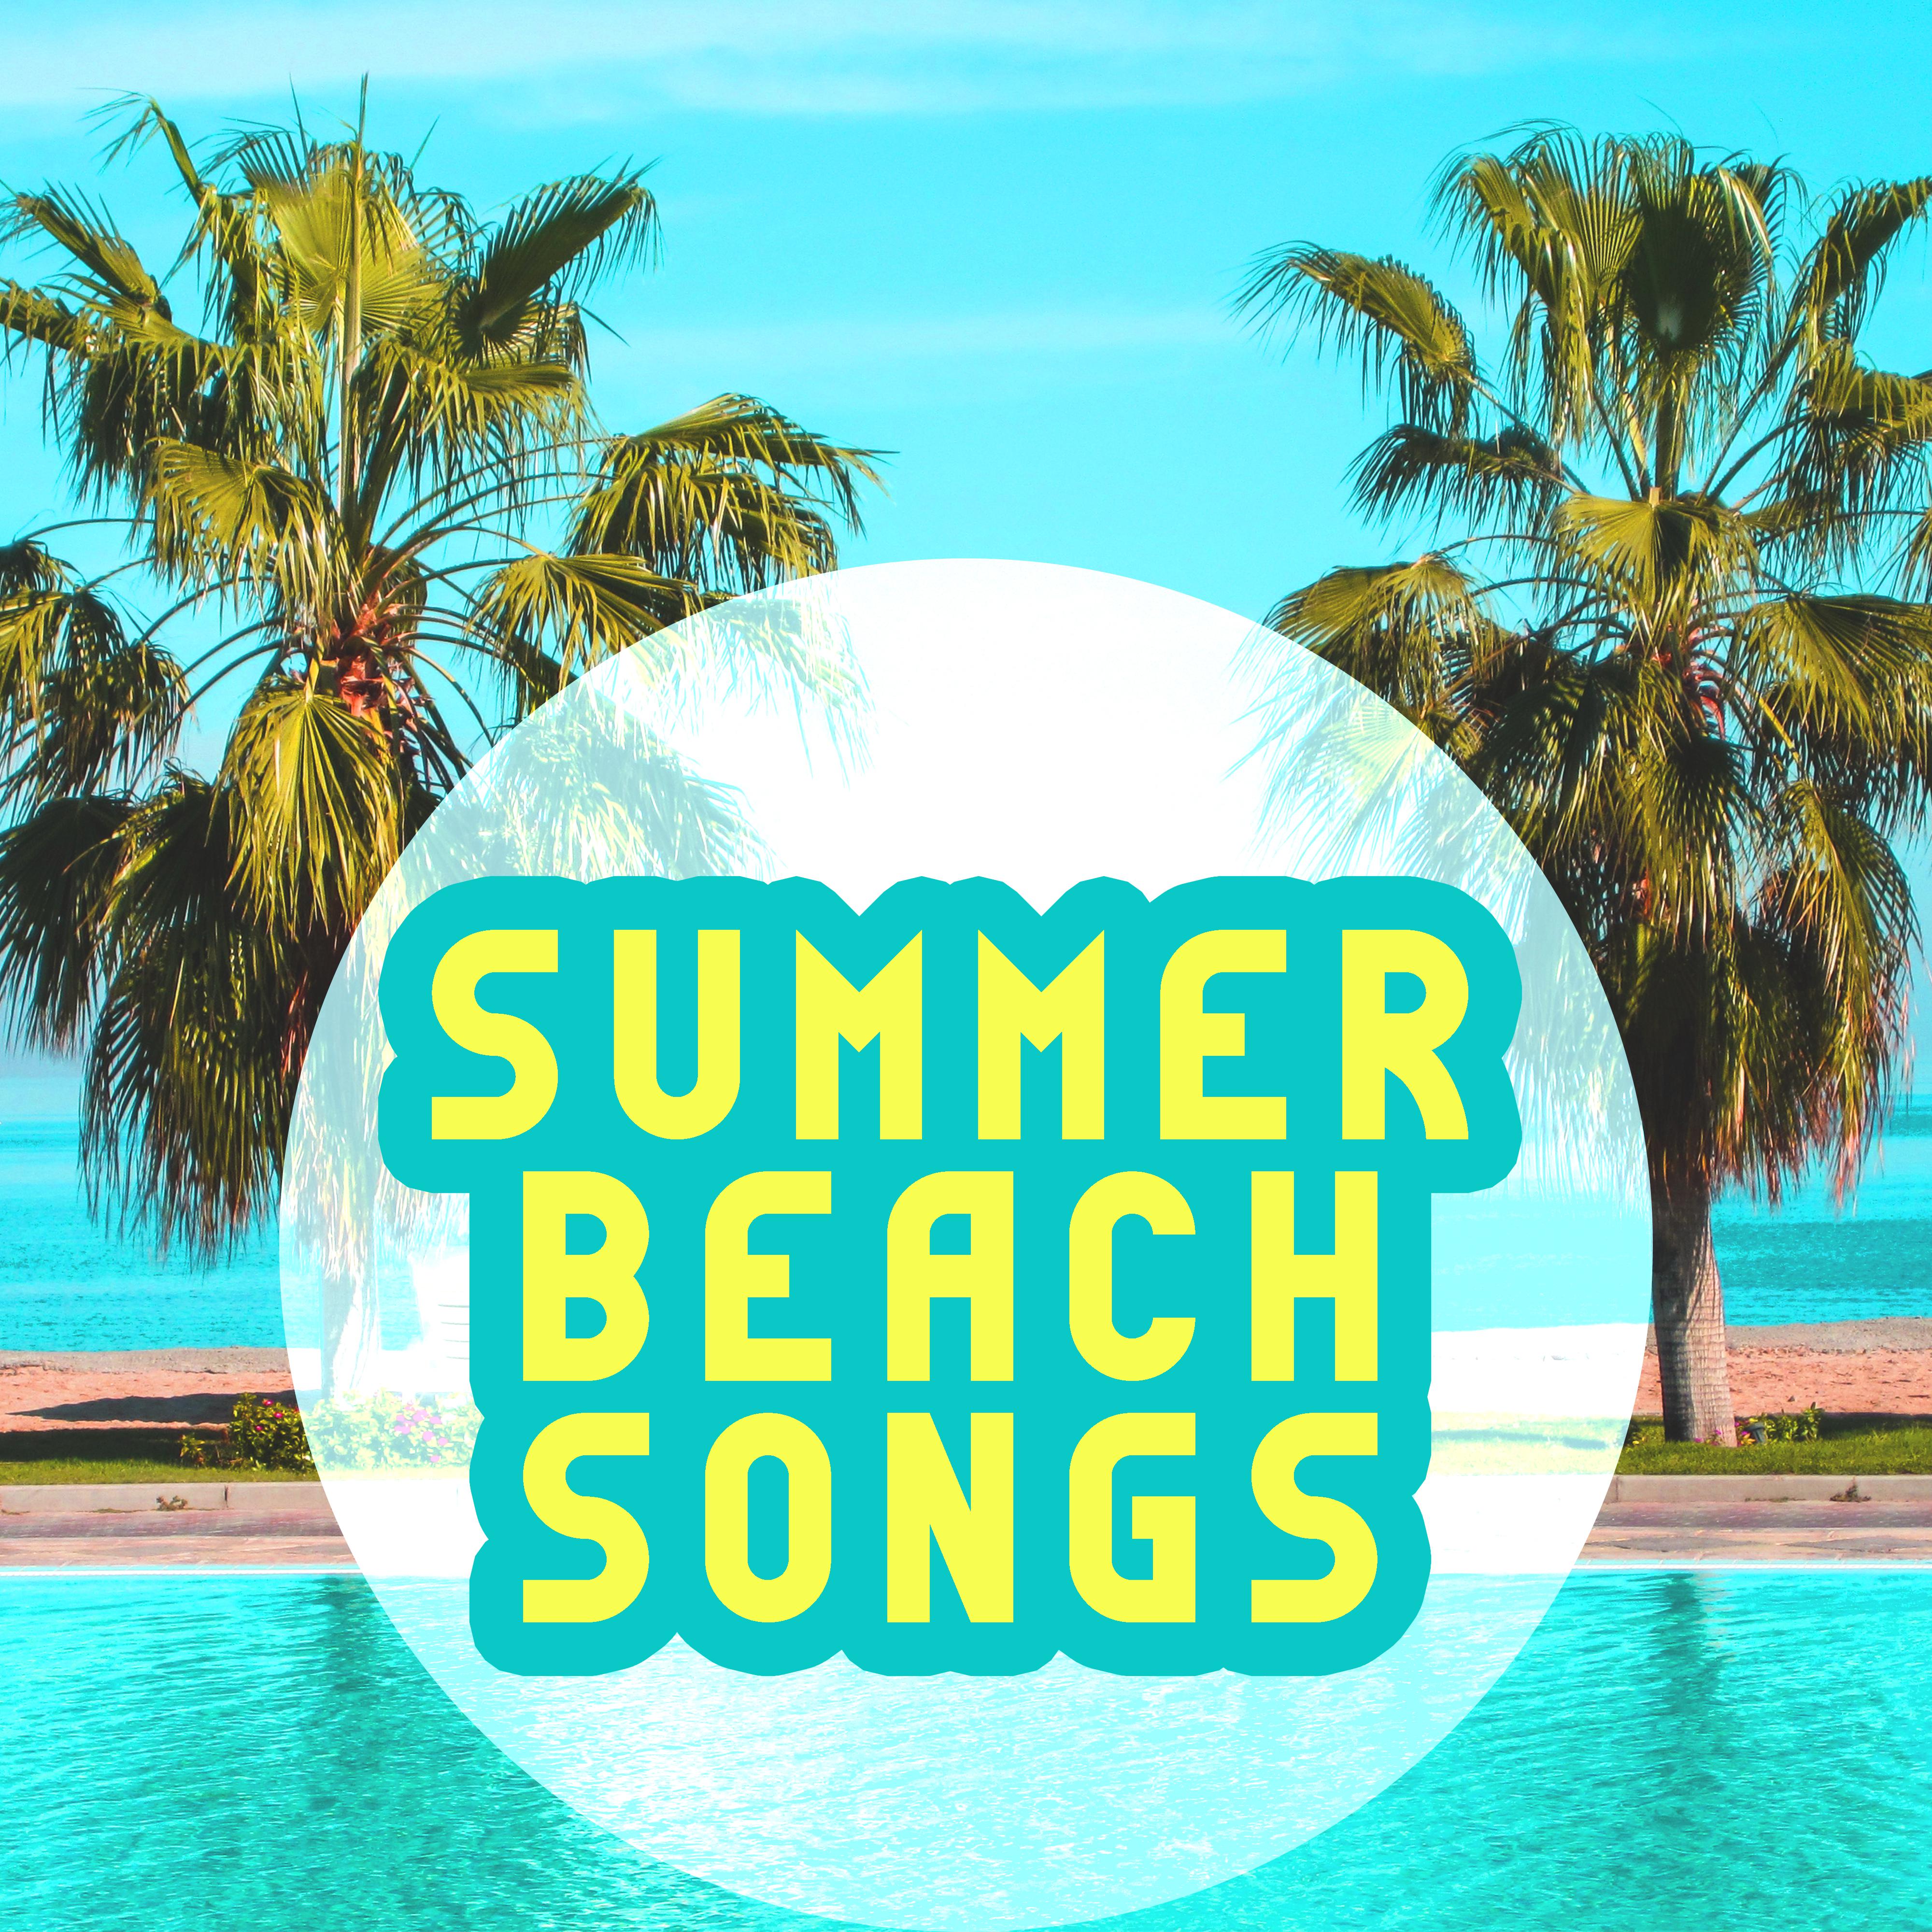 Summer Beach Songs  Relaxing Ibiza Music, Sounds to Rest, Chill Out Melodies, Holiday Vibes